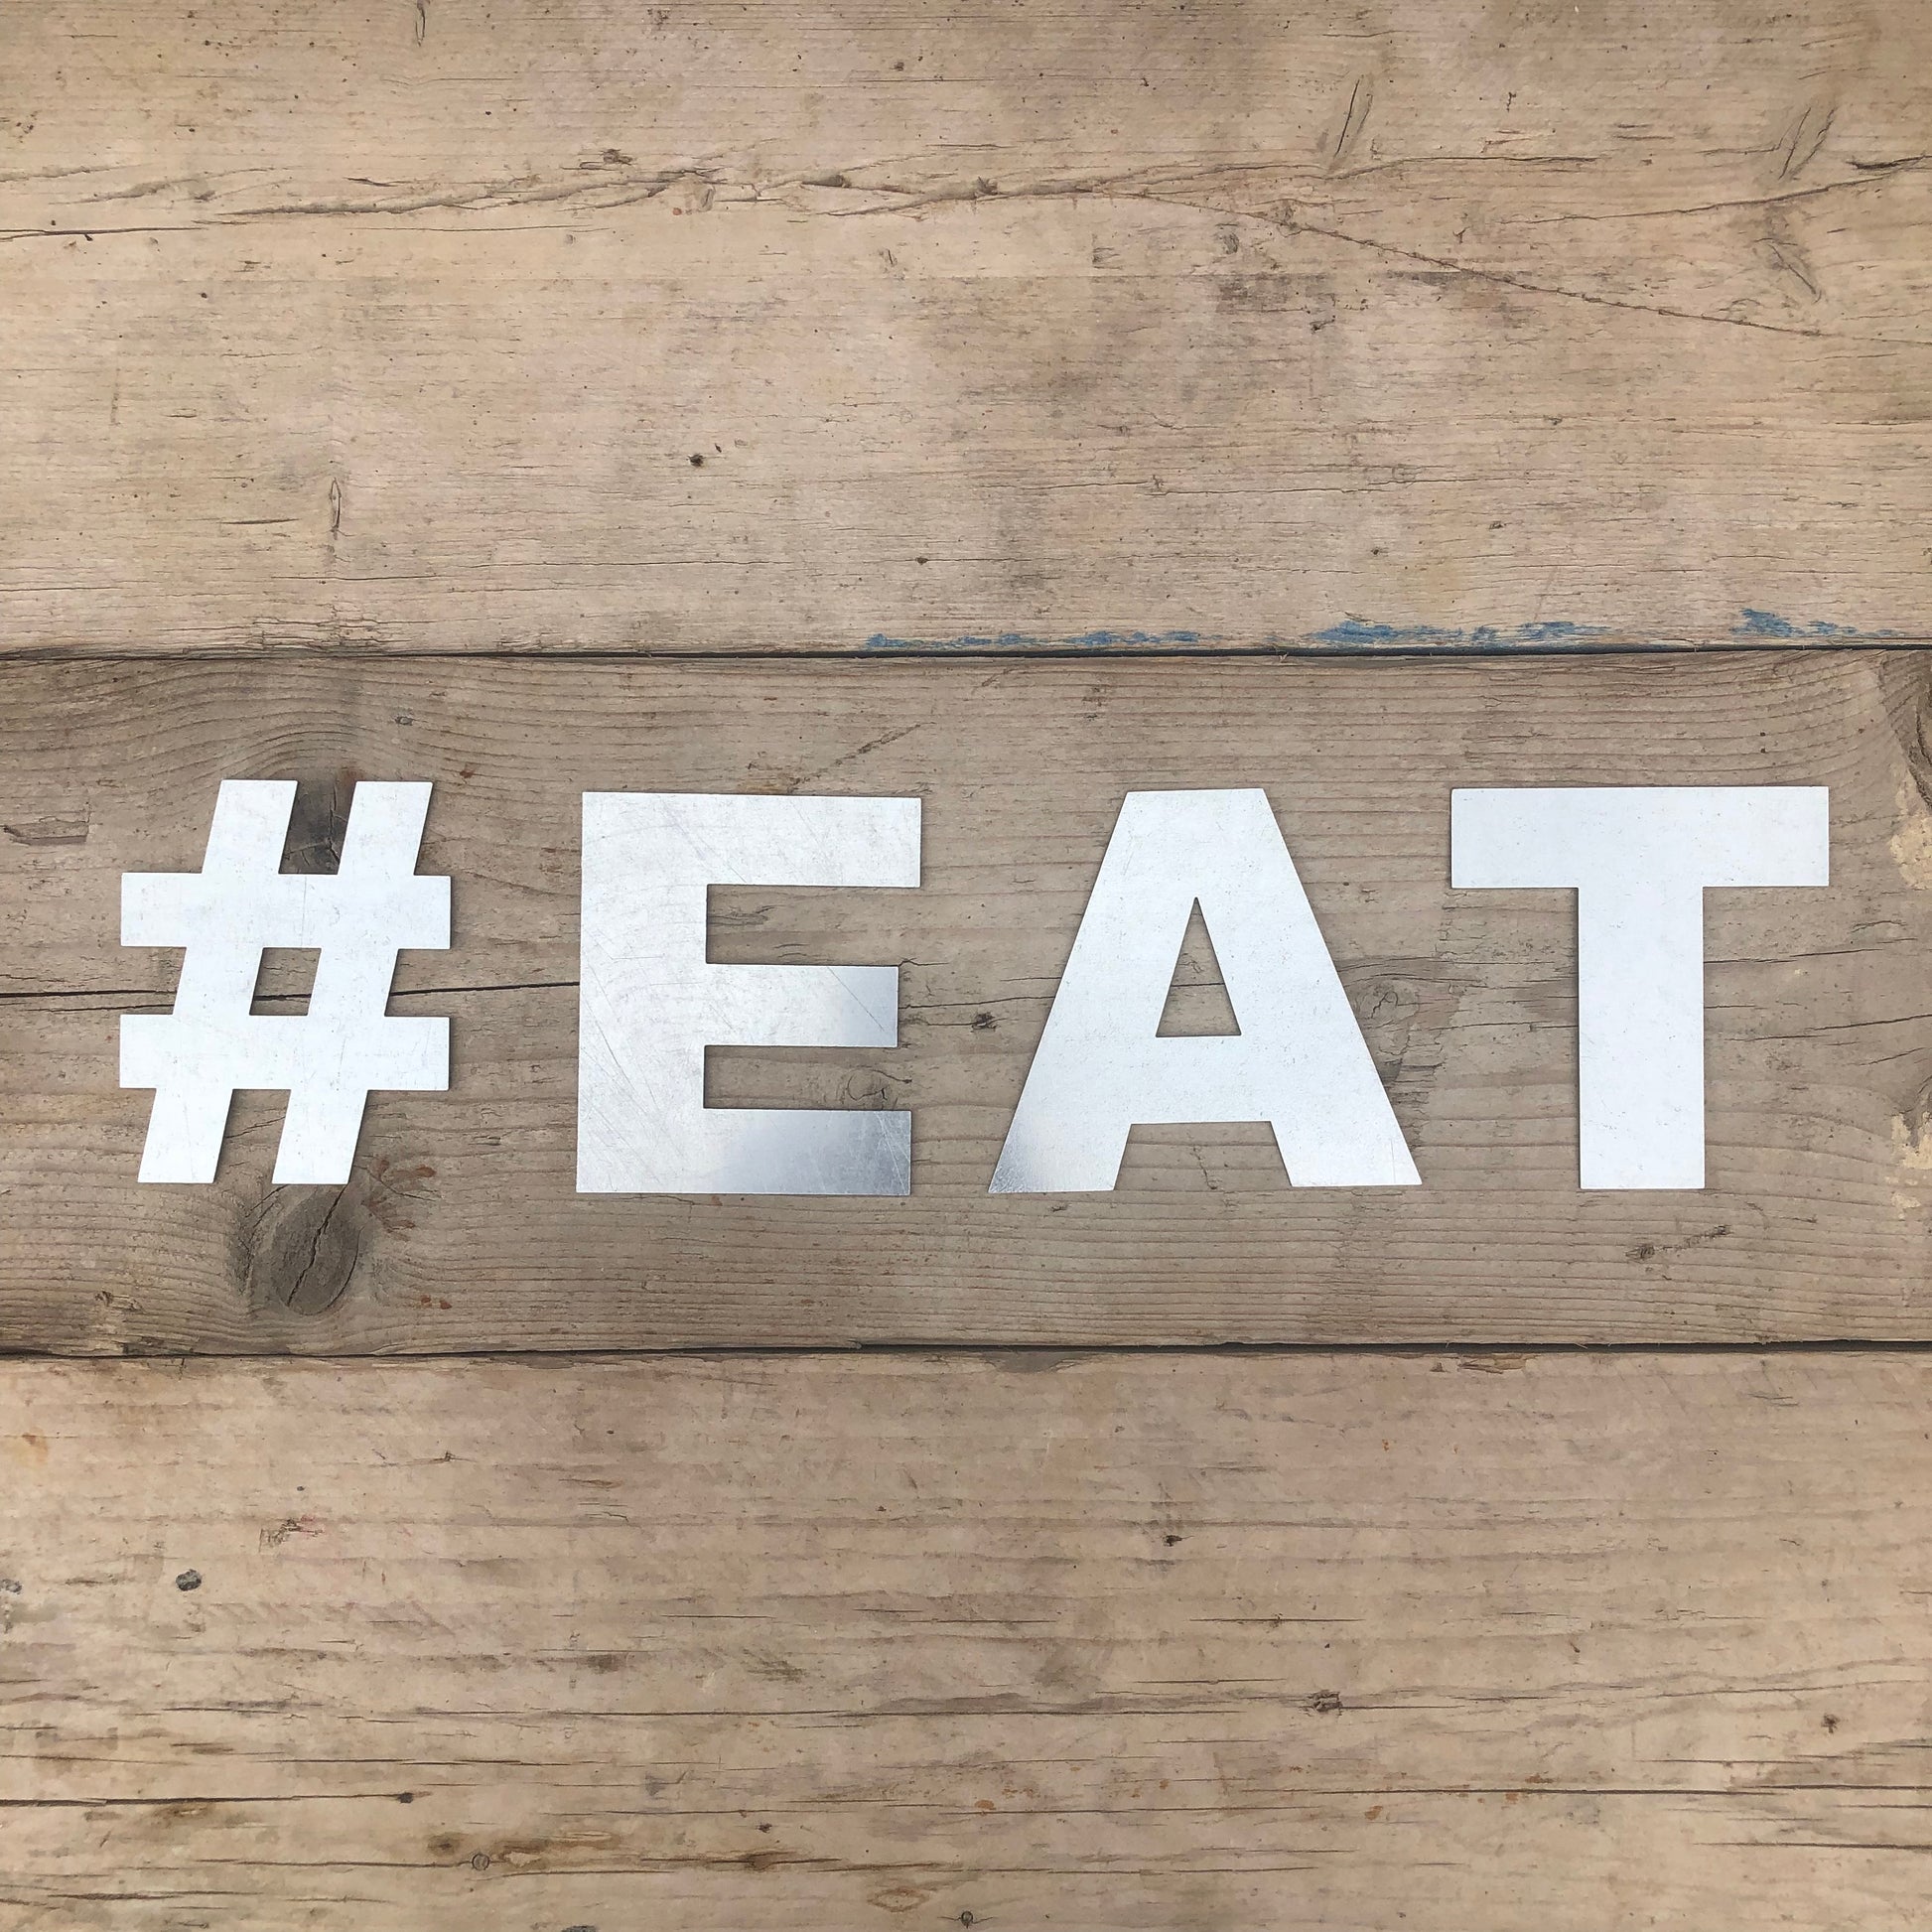 Galvanized steel fat font lettering spelling out #EAT